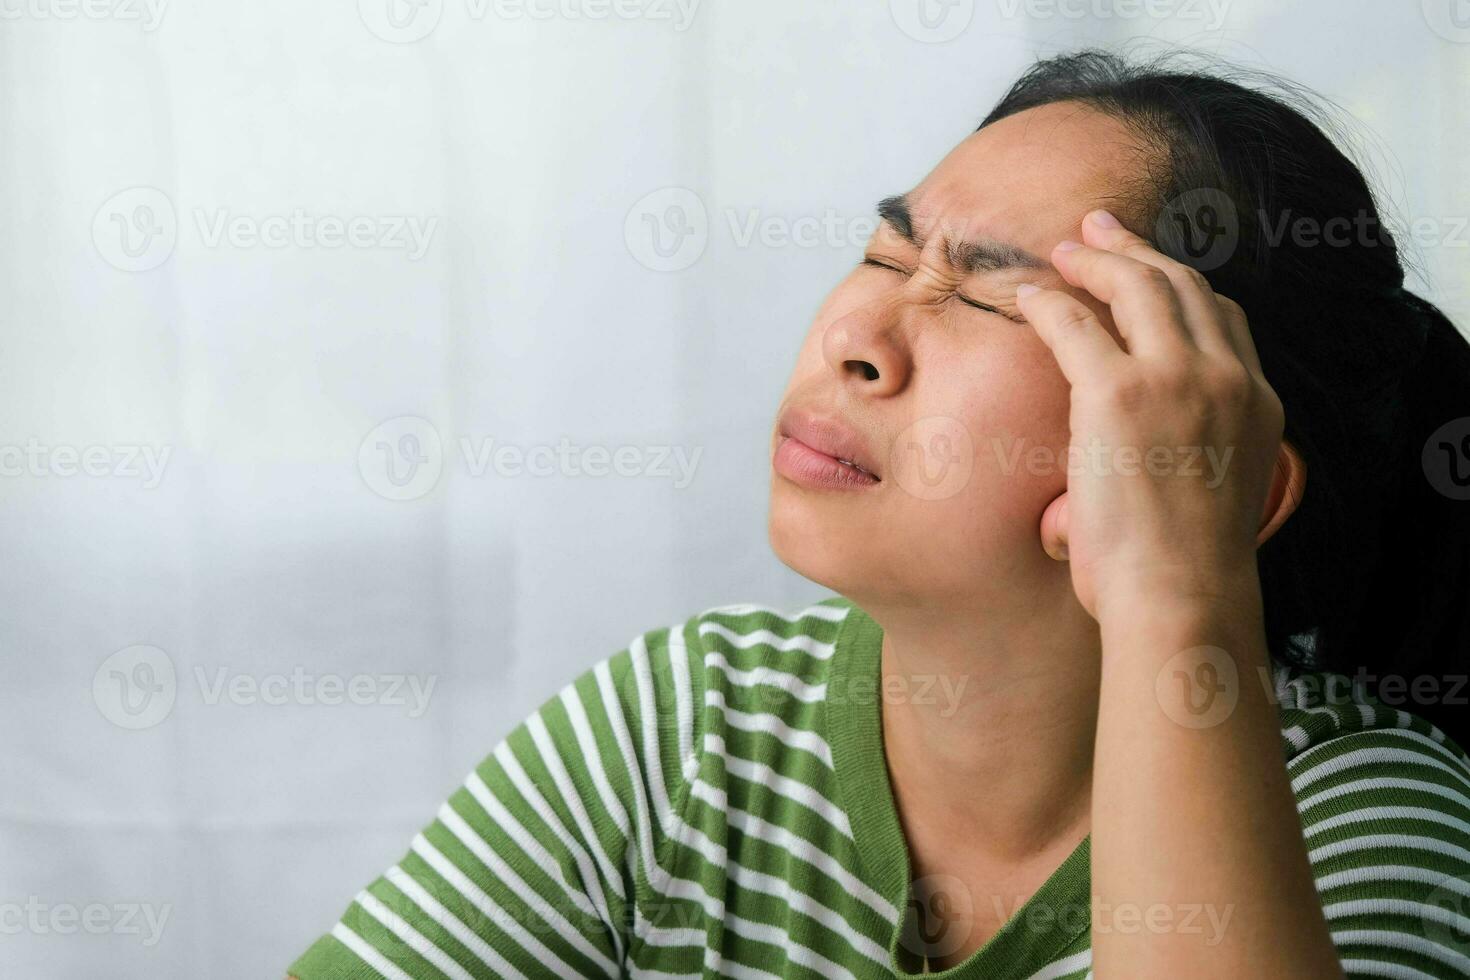 Young woman having headache against white curtain background in room. An adult woman touching head because of headache or migraine. Hands on head. photo